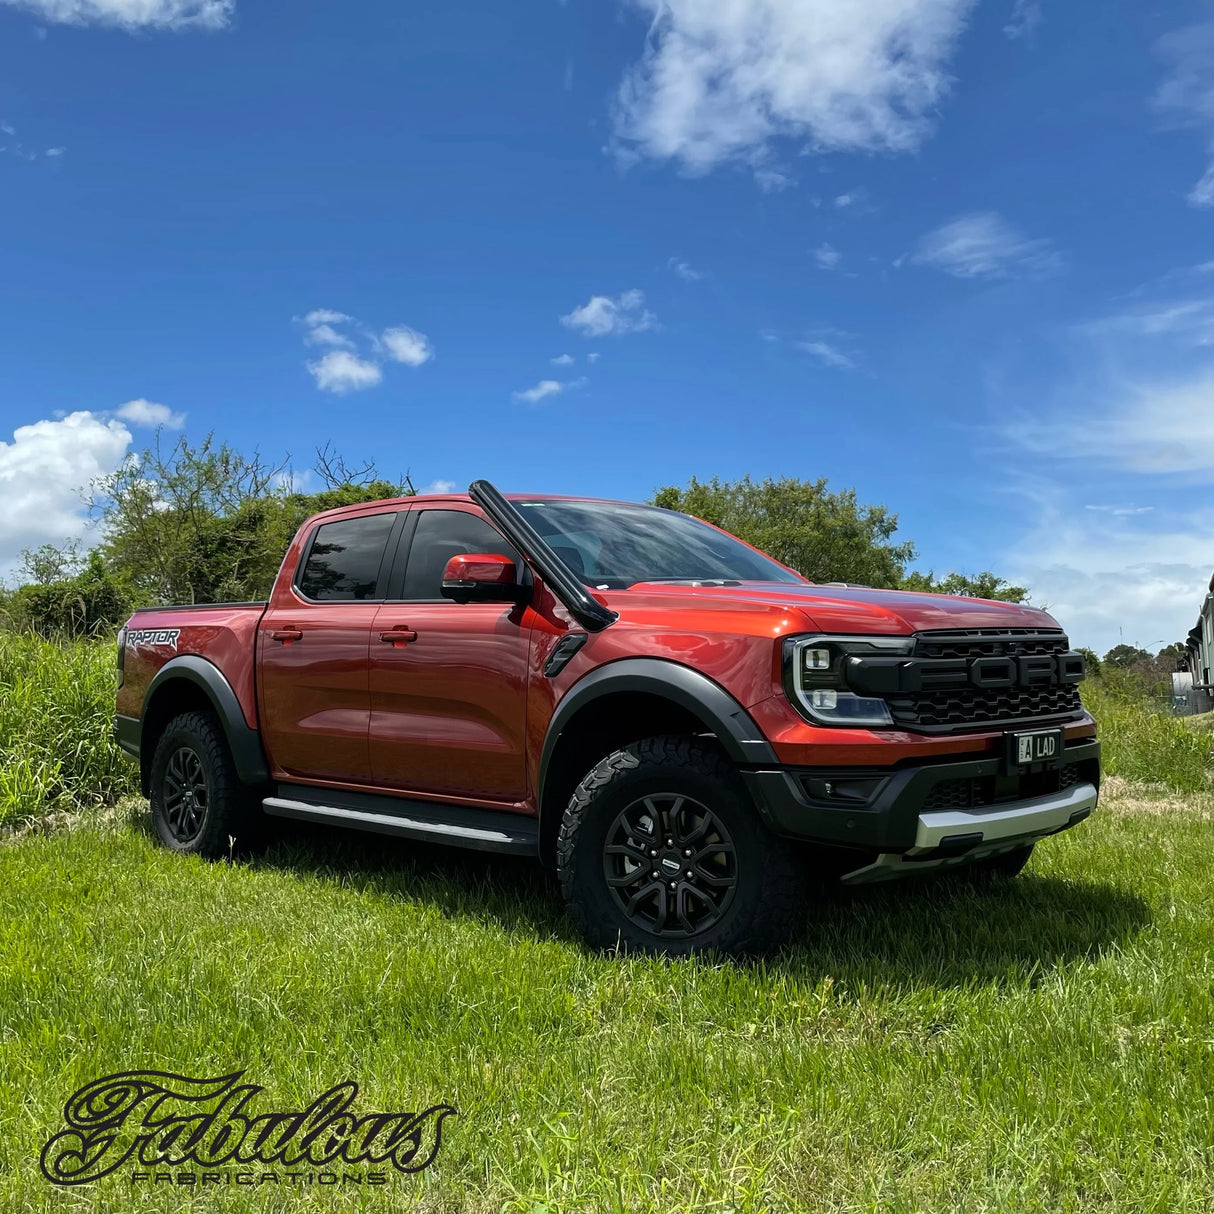 Fabulous Fabrications Ford Ranger Raptor Next Gen Stainless Snorkel and Alloy Washer Bottle Kit